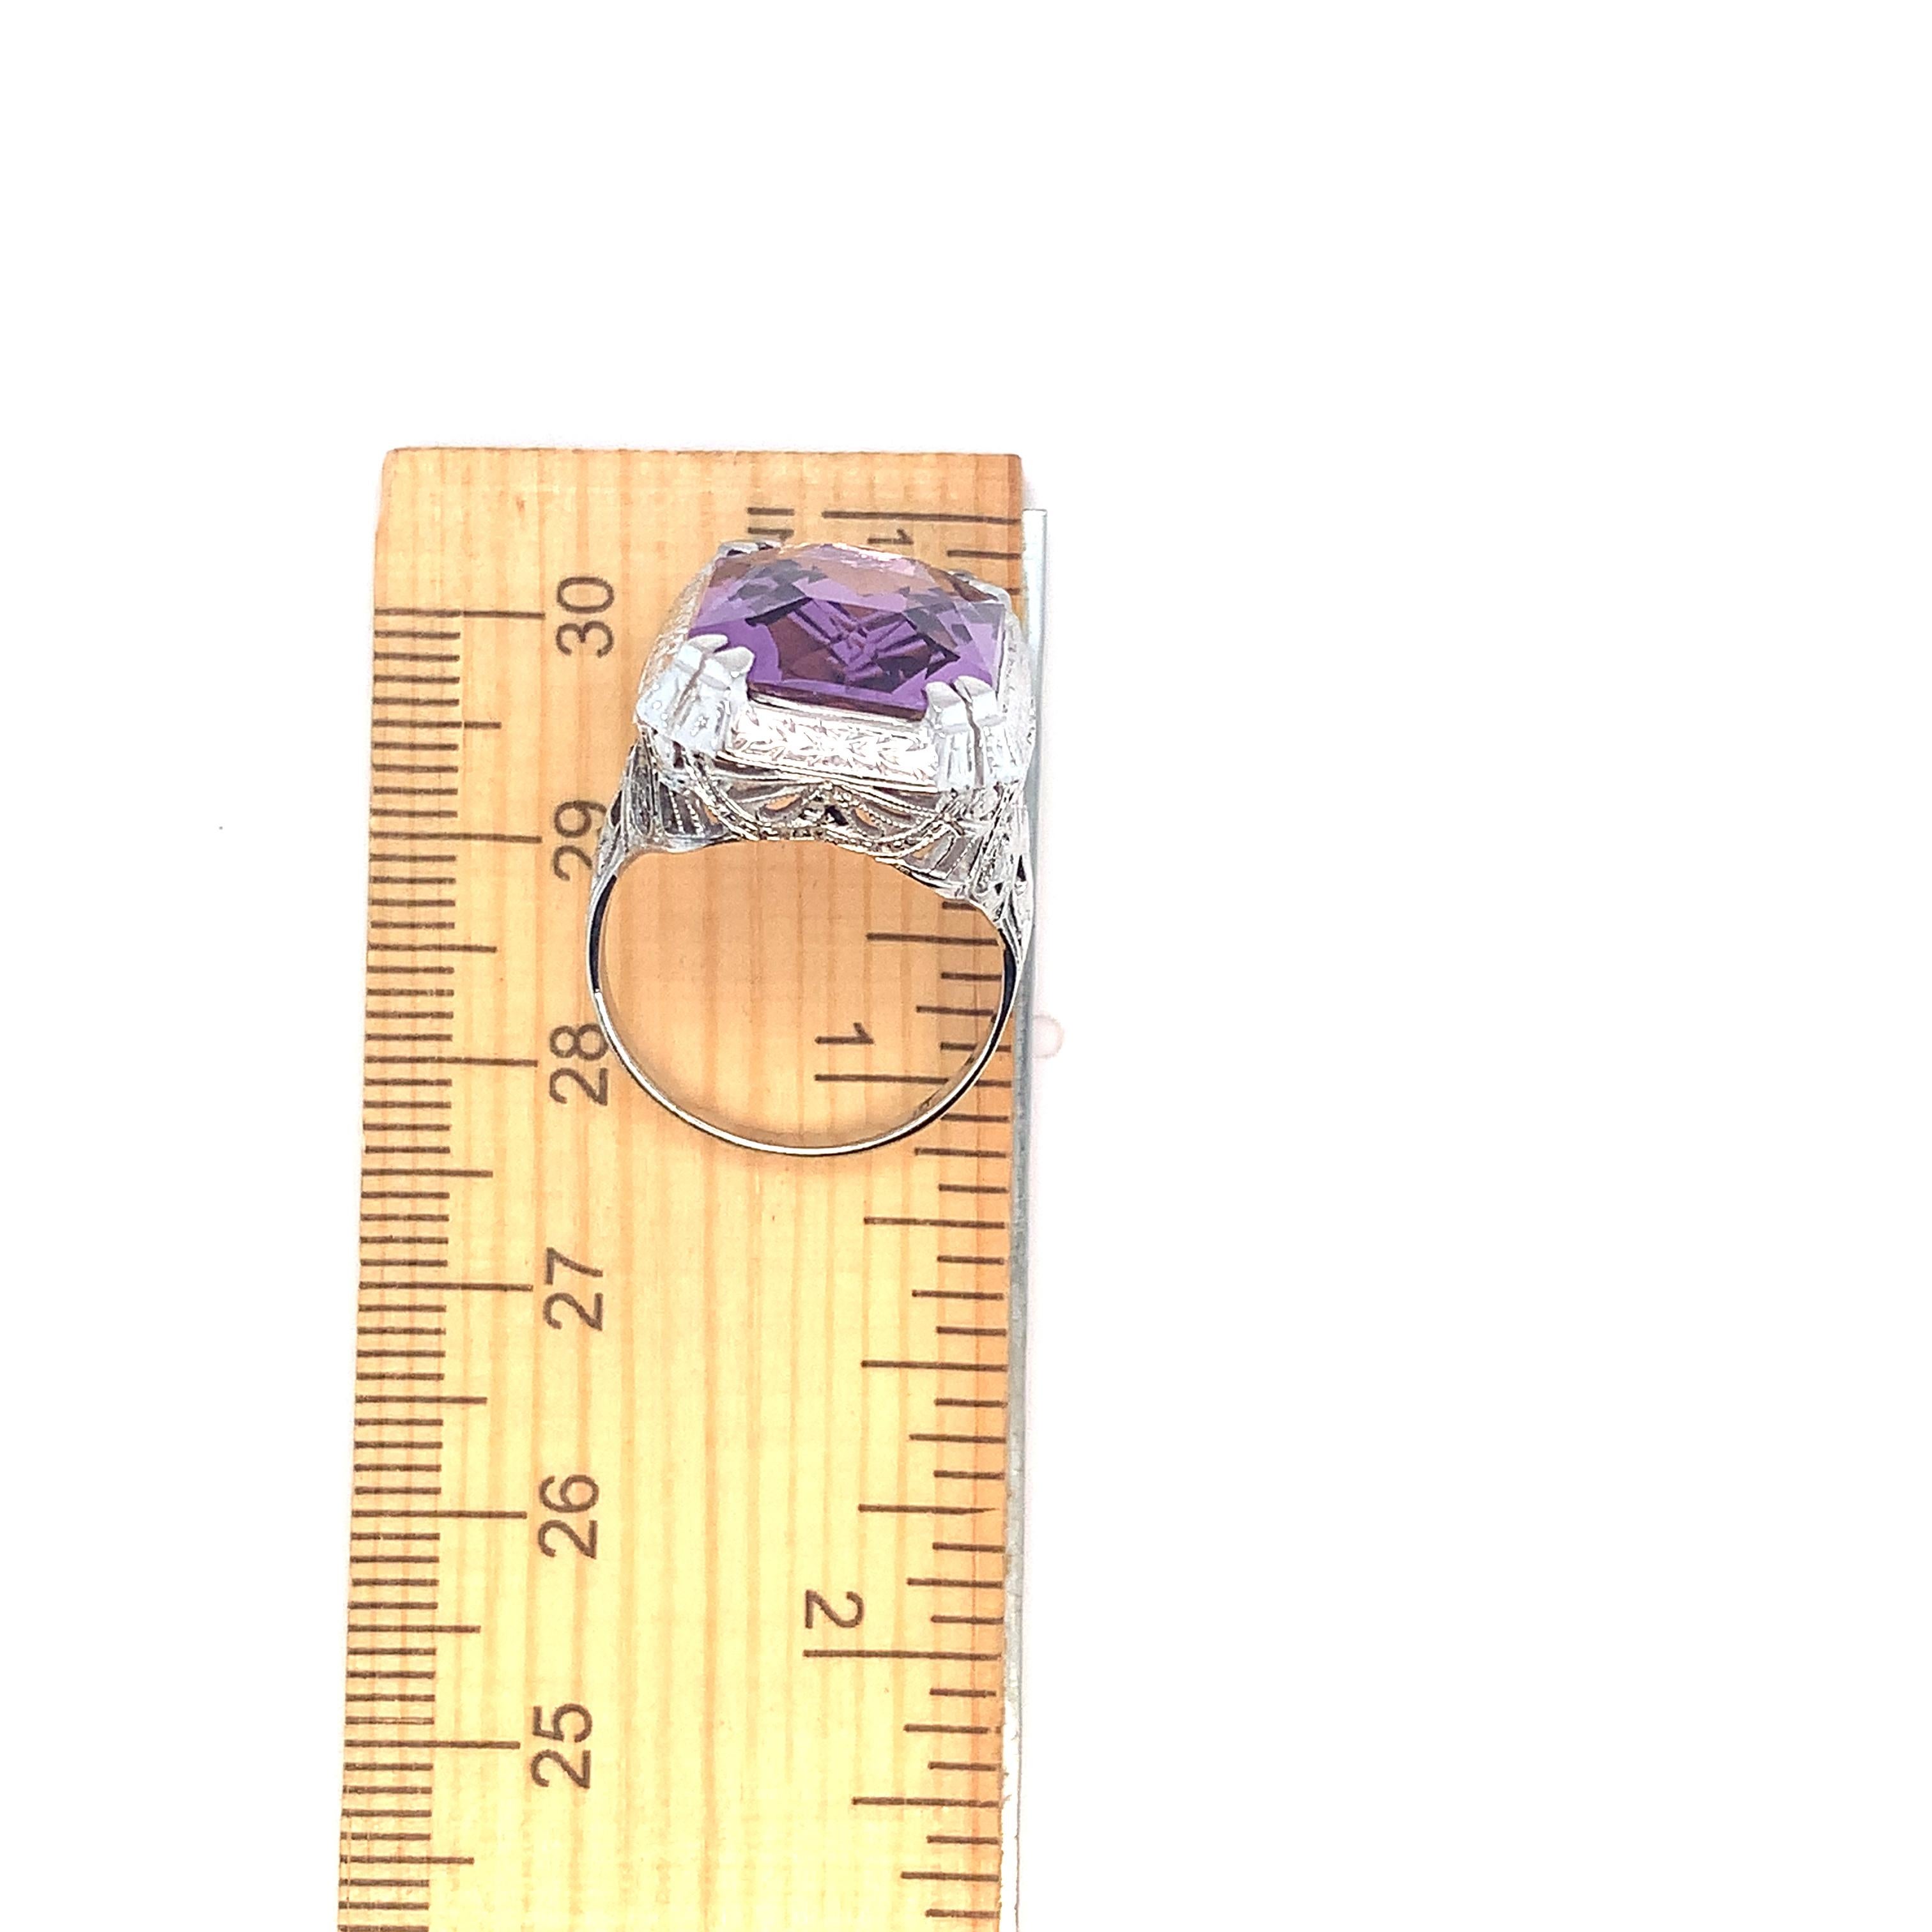 18K white gold filigree Art Deco ring featuring a large amethyst weighing 9.09 carats. This is the original stone, carefully re-polished in the same rectangular brilliant cut. The amethyst measures about 16mm x 12mm. The ring fits a size 7 finger